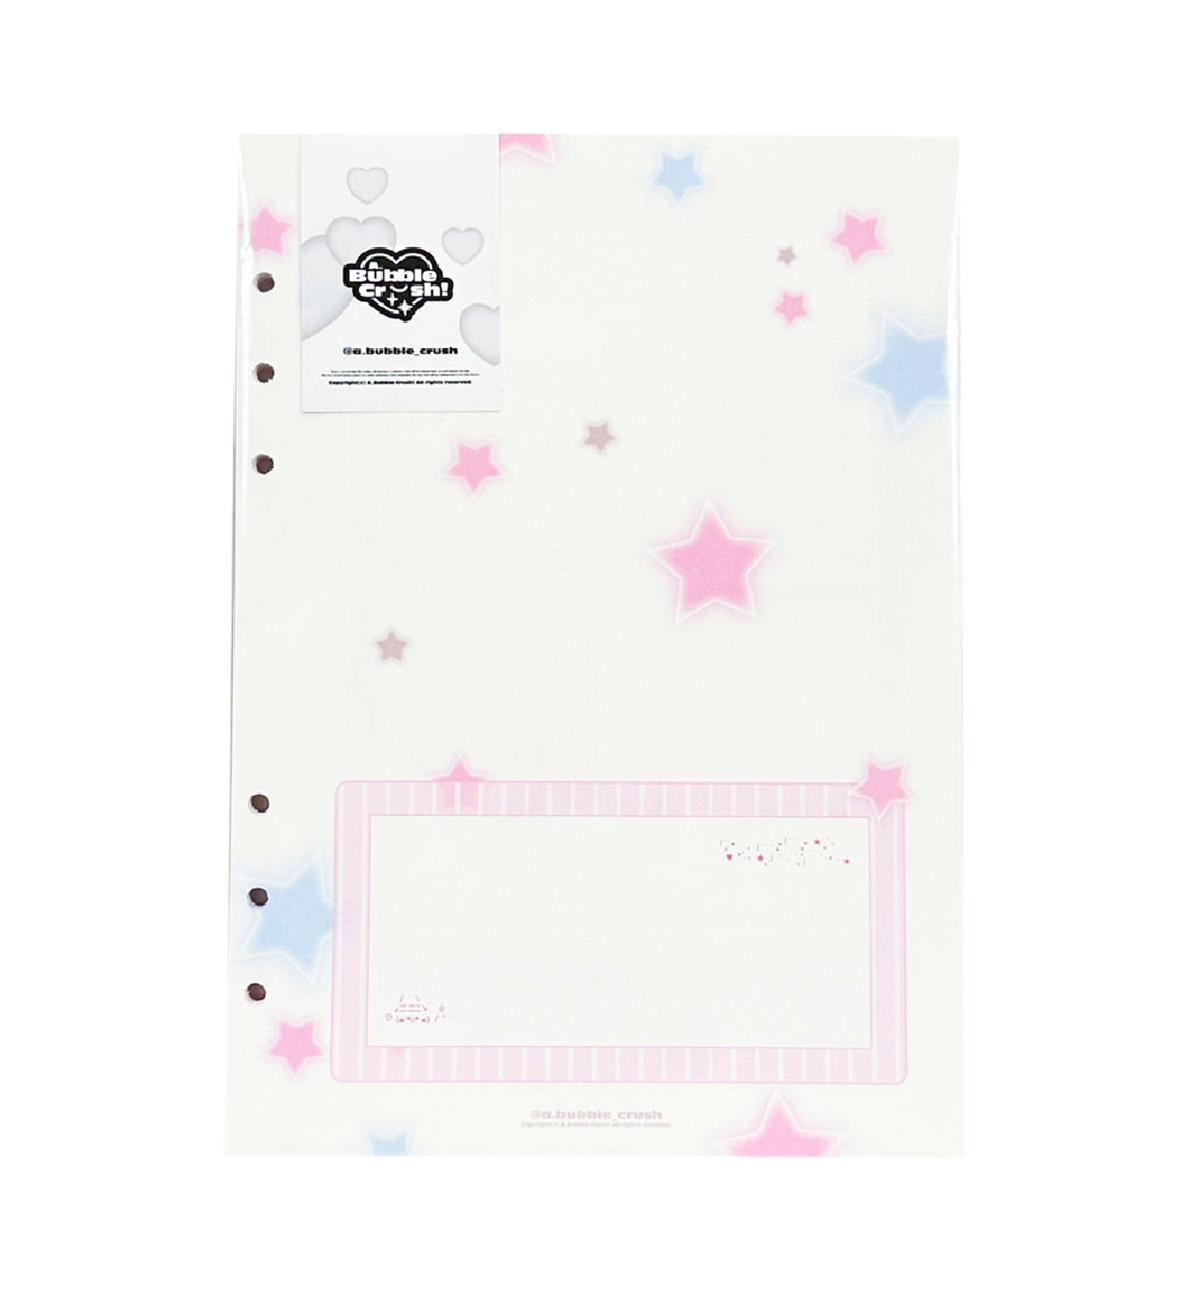 A5 Web Page Paper Refill [Pink]